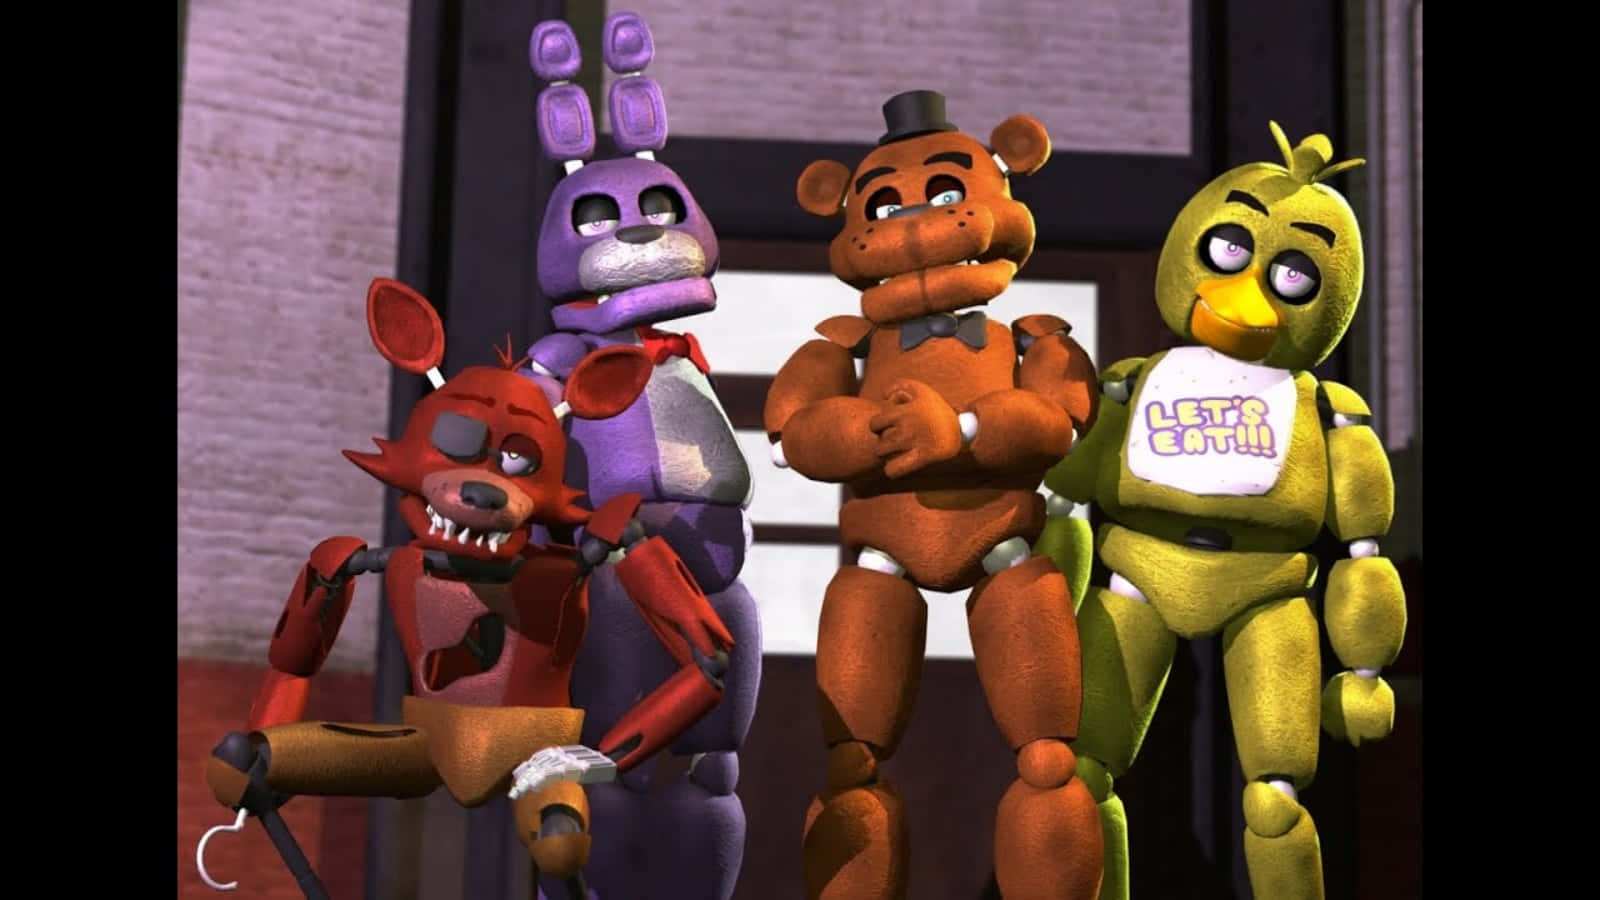 Beware the Five Nights at Freddy's Characters